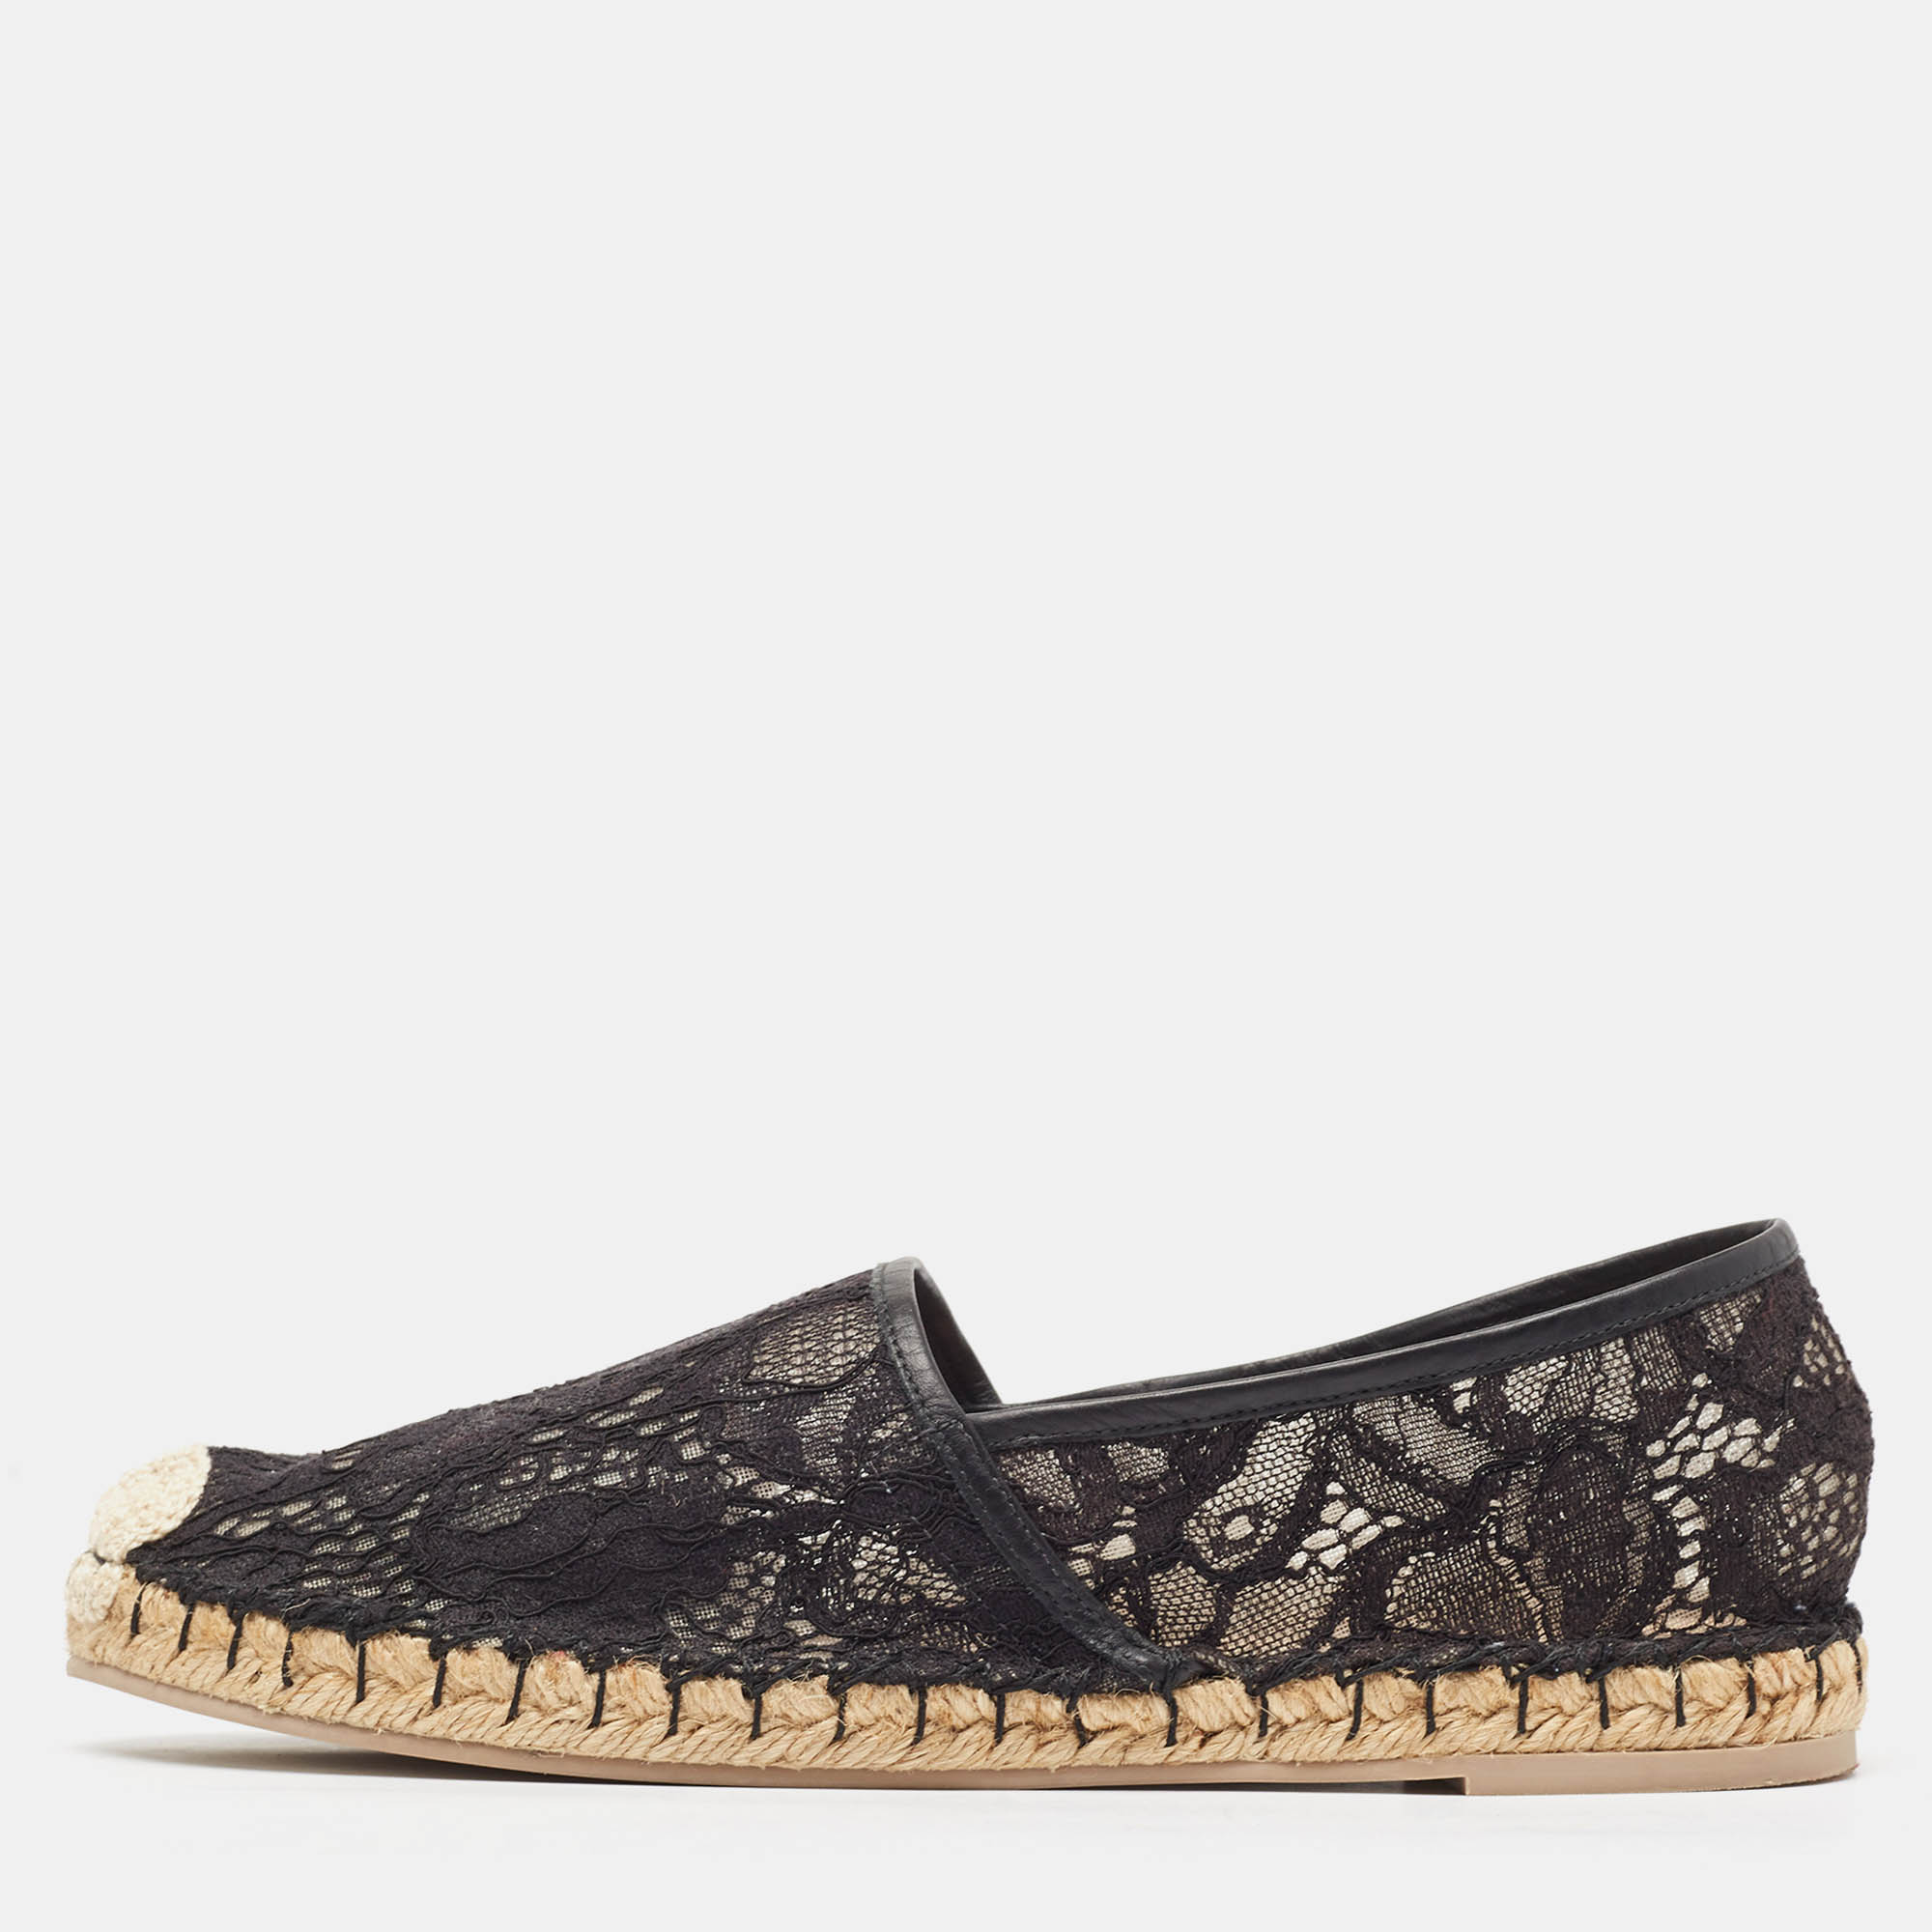 Valentino black lace and mesh espadrille flats size 40